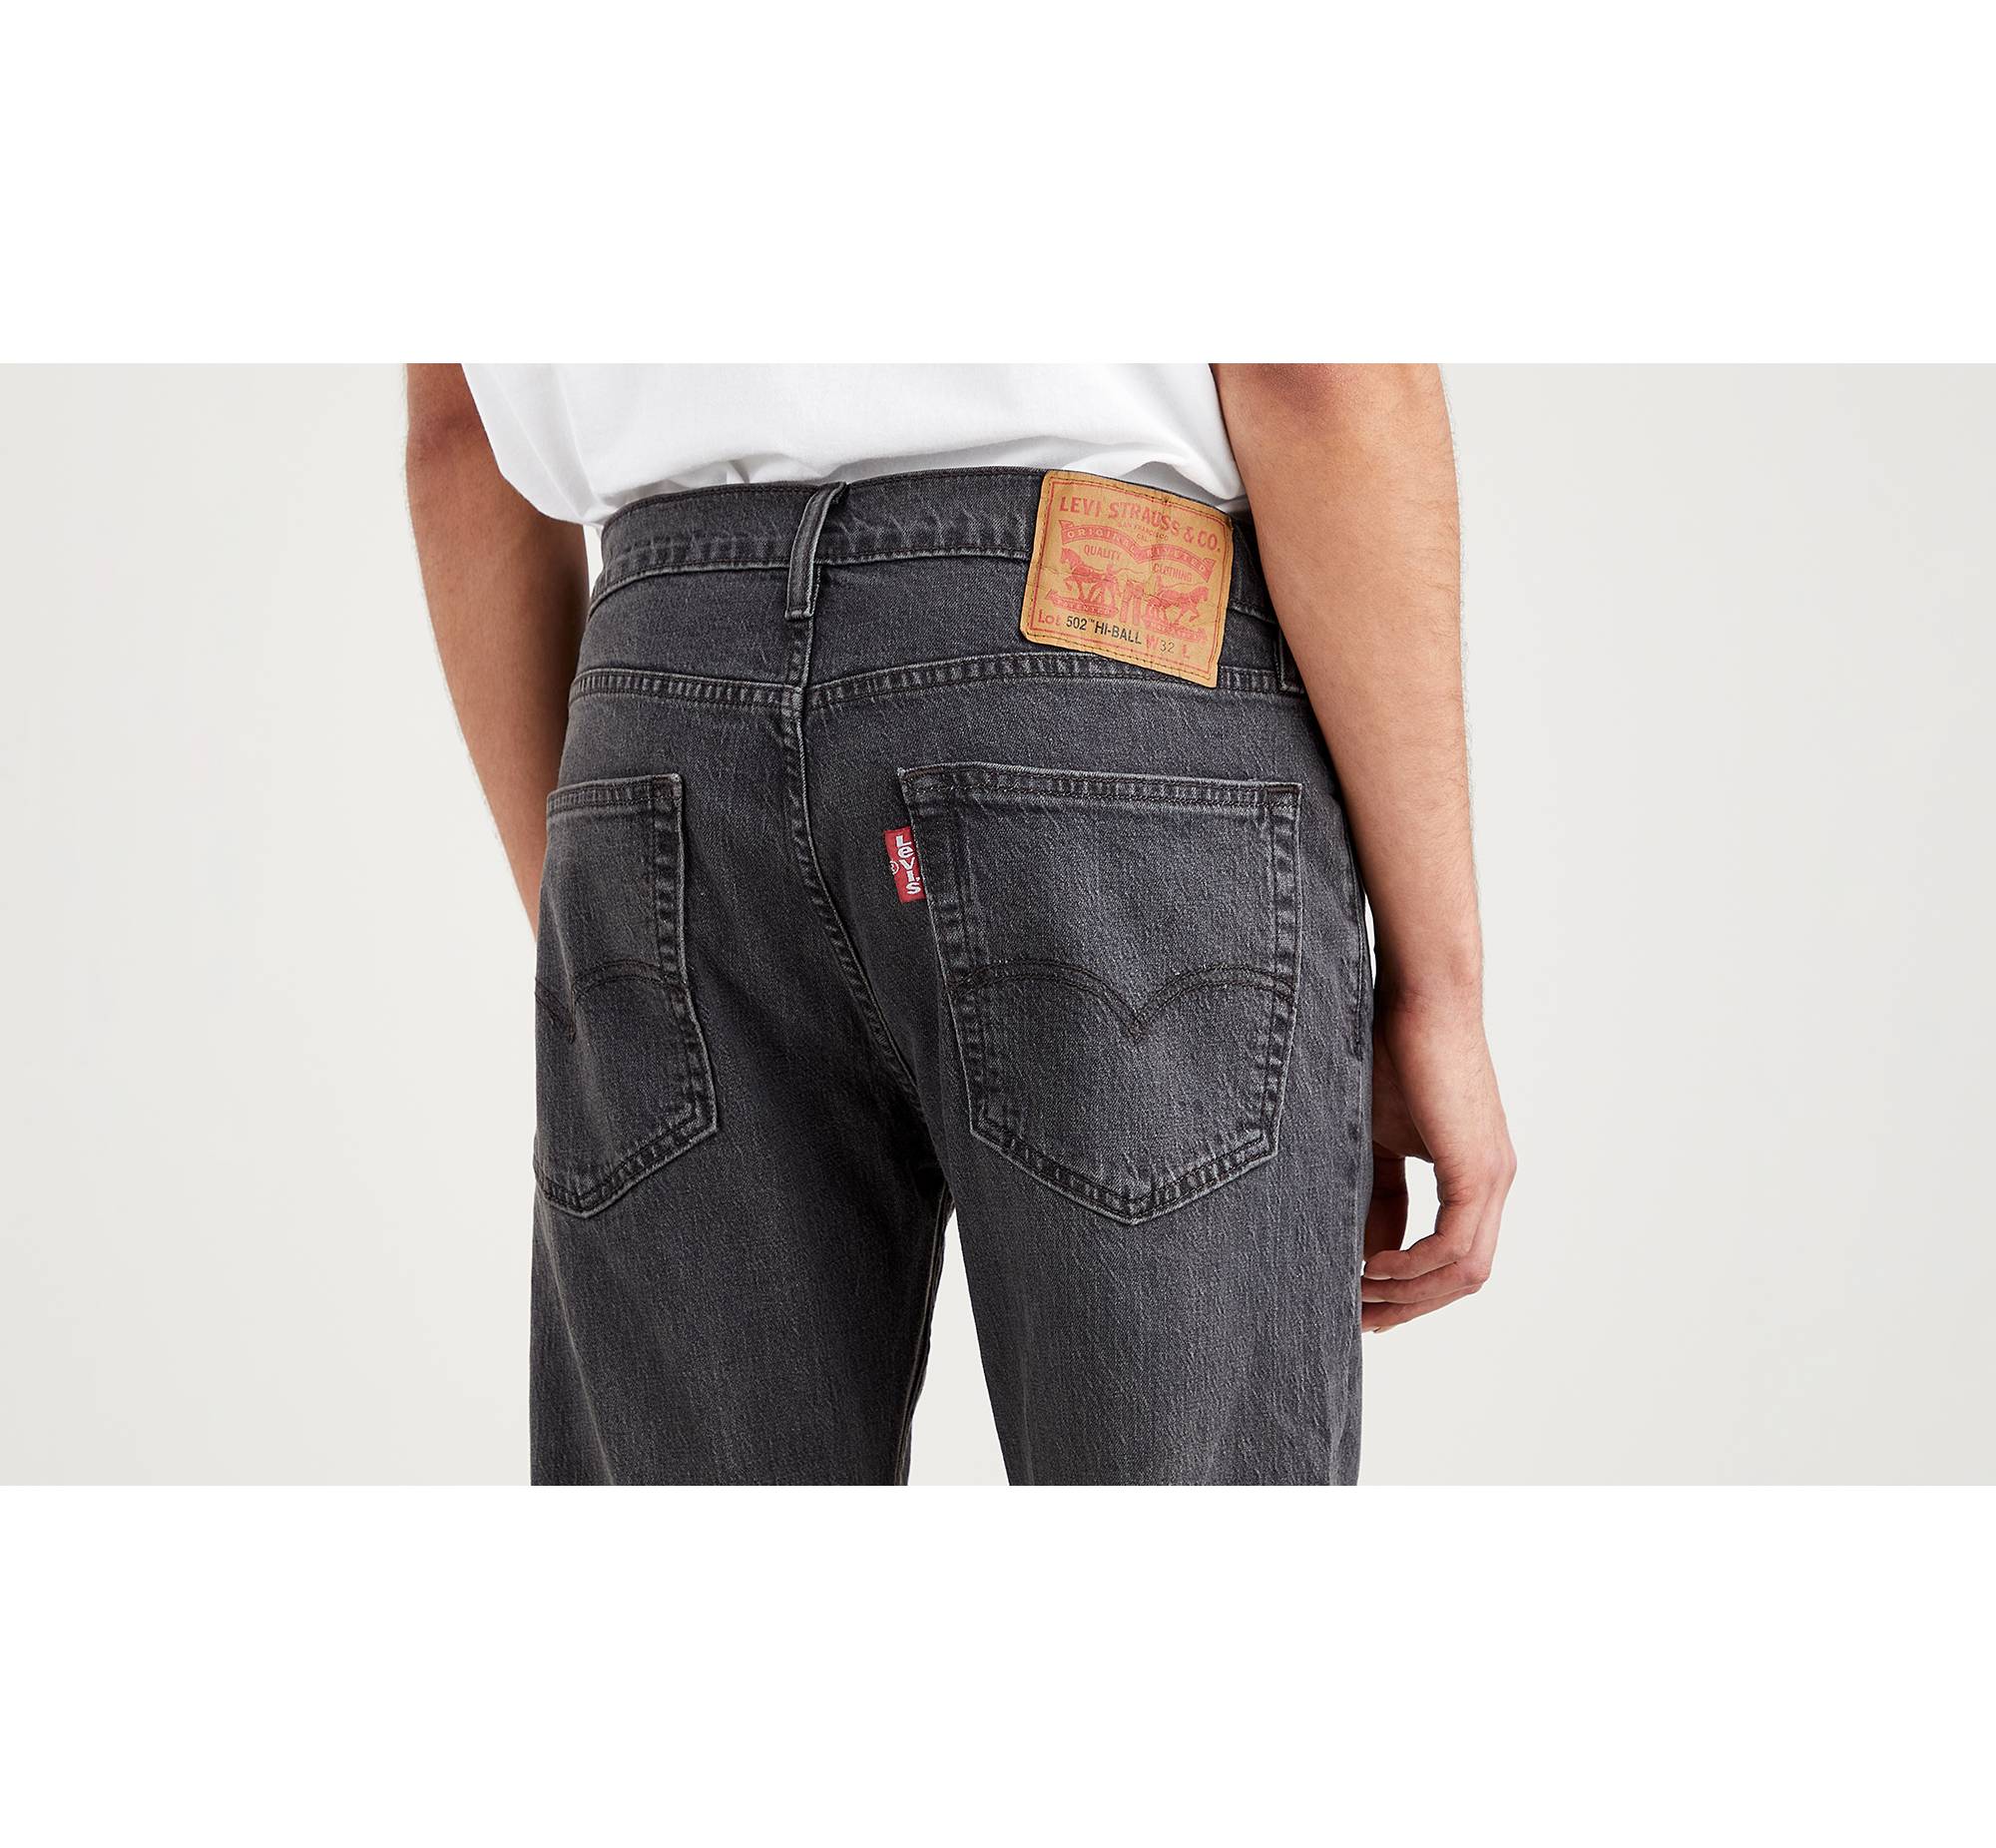 502™ Tapered Hi-ball Jeans - Blue